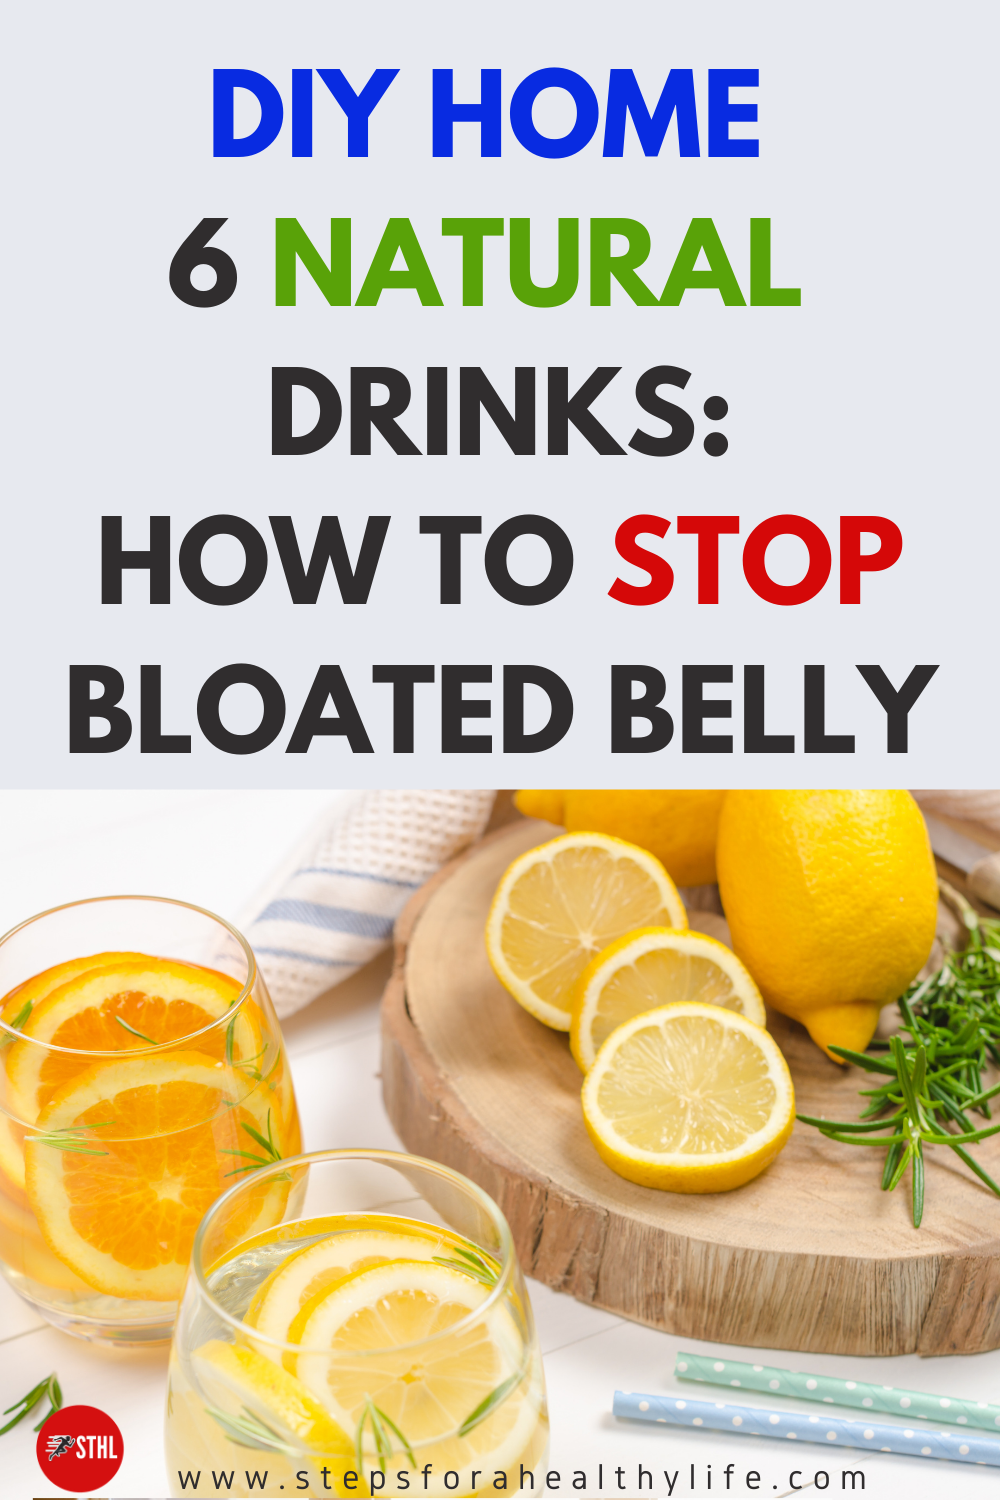 DIY HOME 6 NATURAL DRINKS: HOW TO STOP BLOATED BELLY